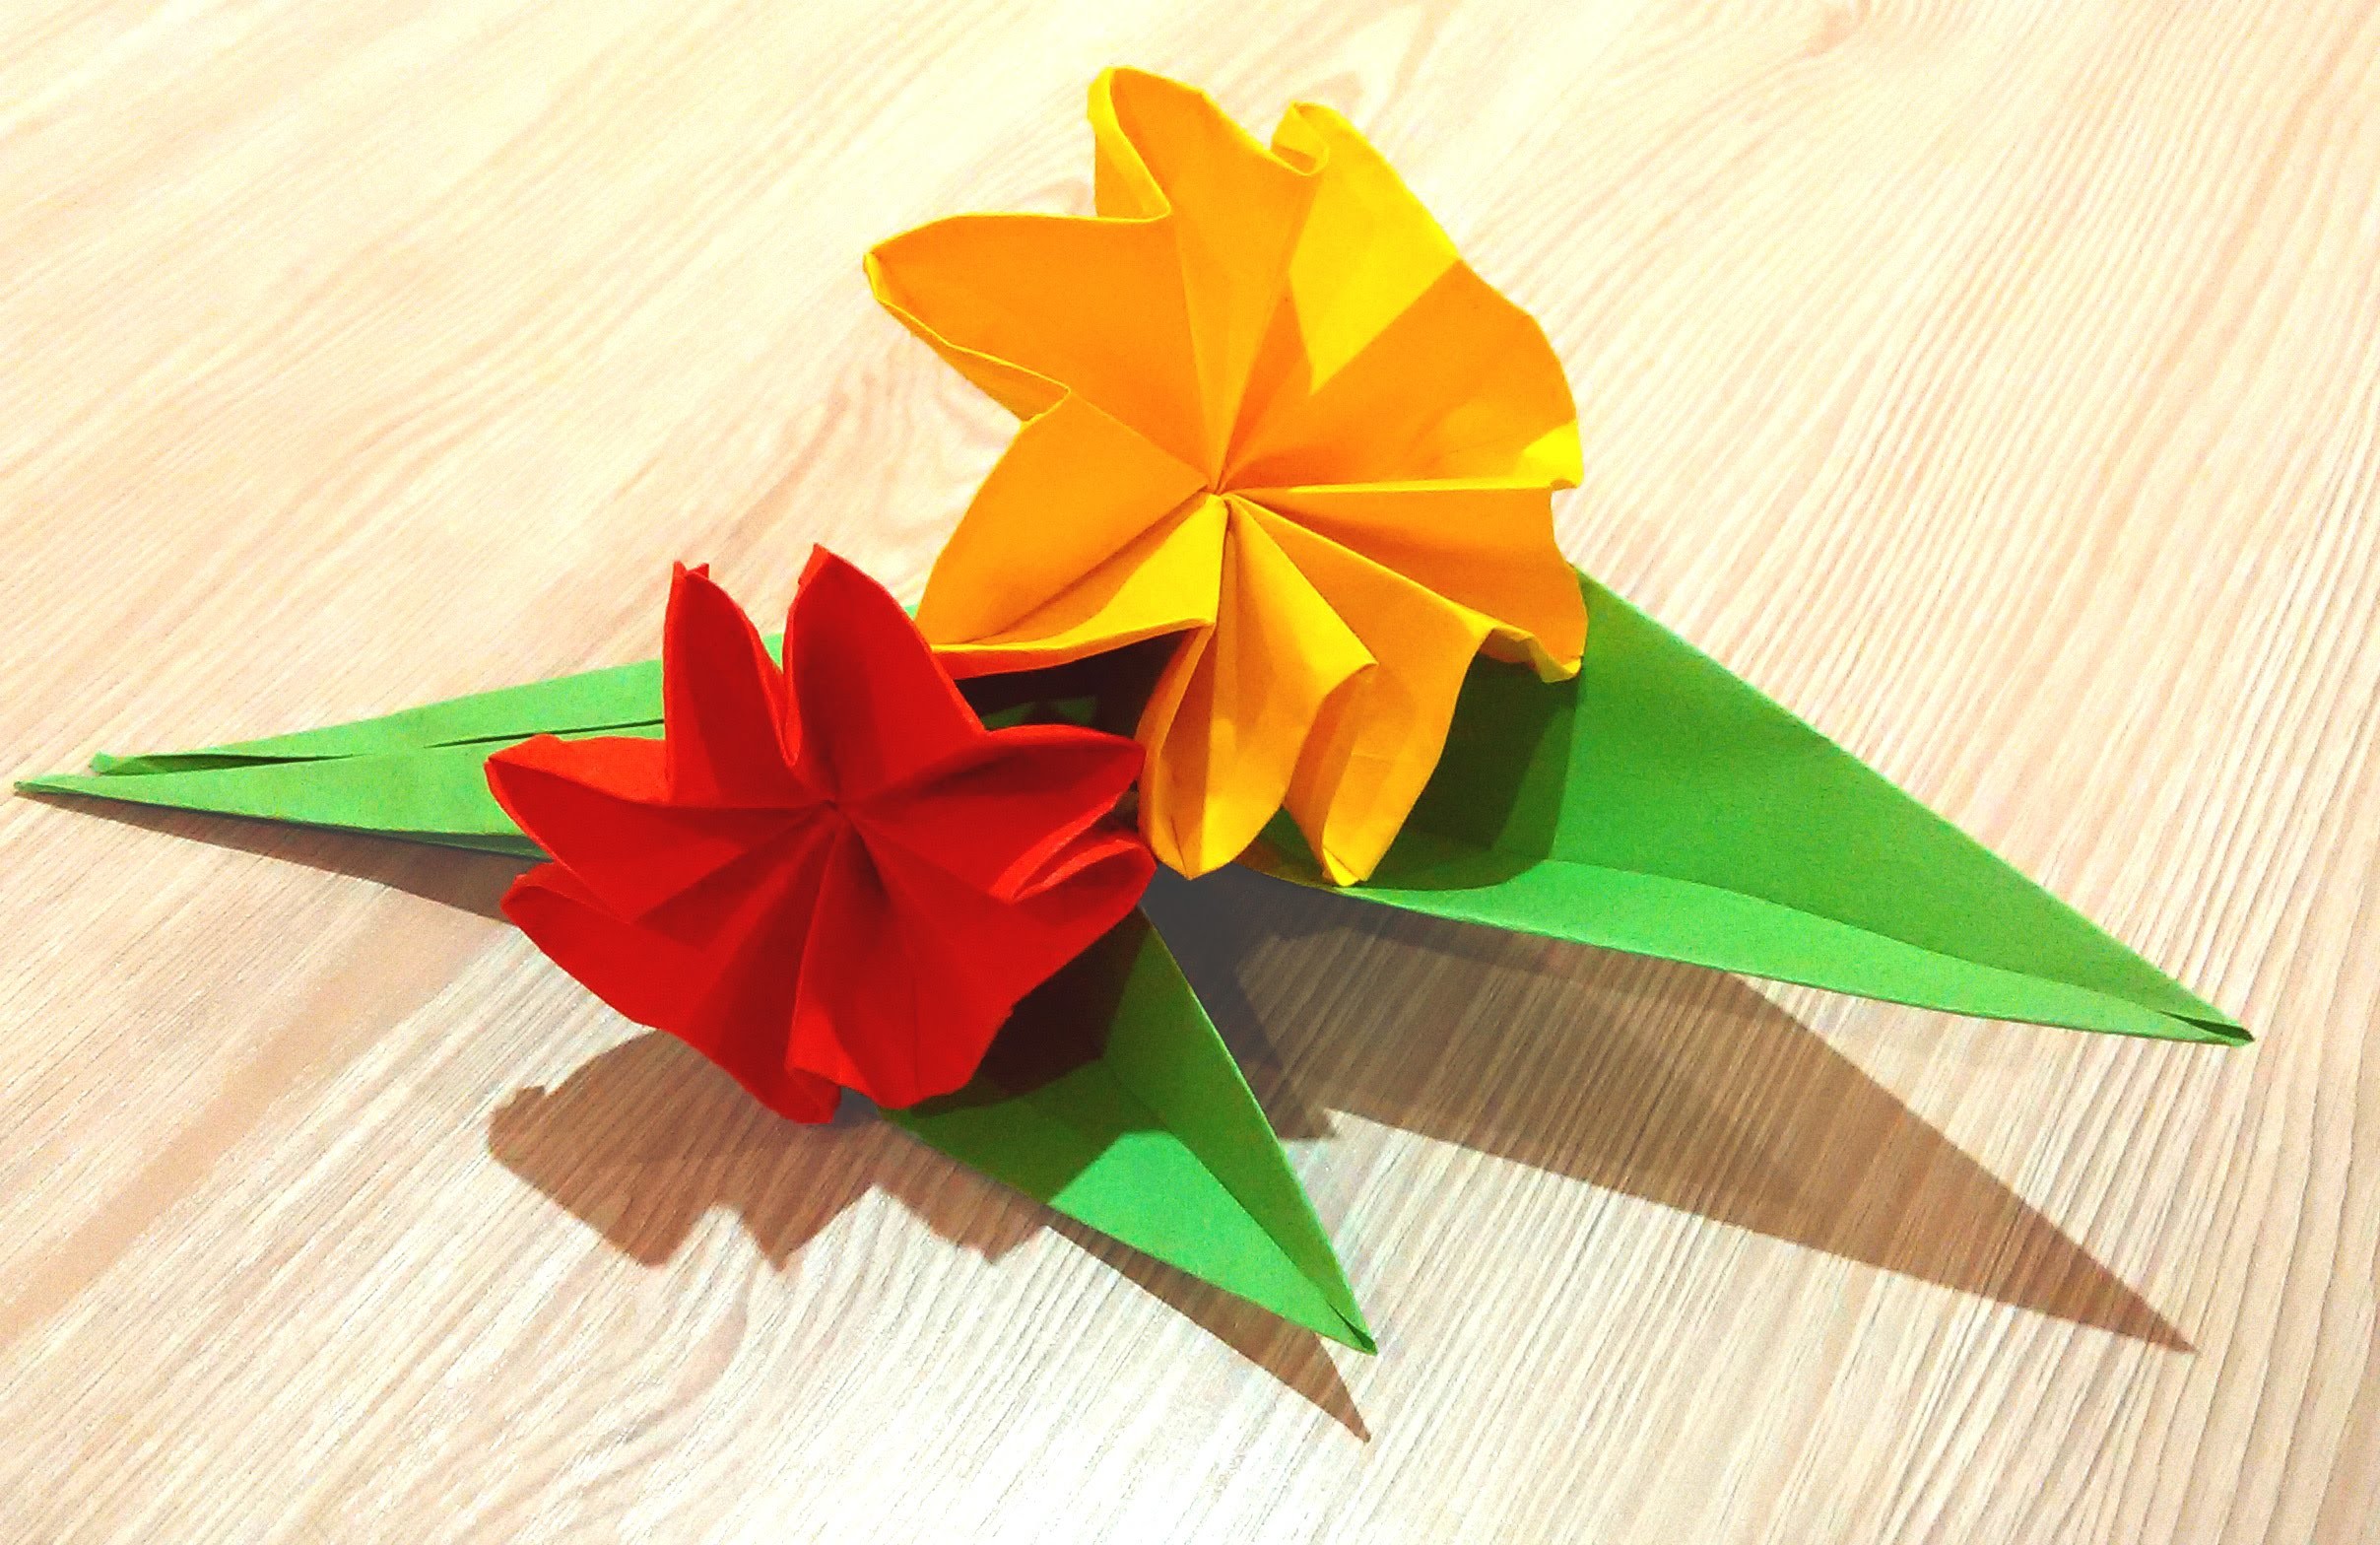 easy quick origami flower Step wikihow simples origamitheory - Paper Craft